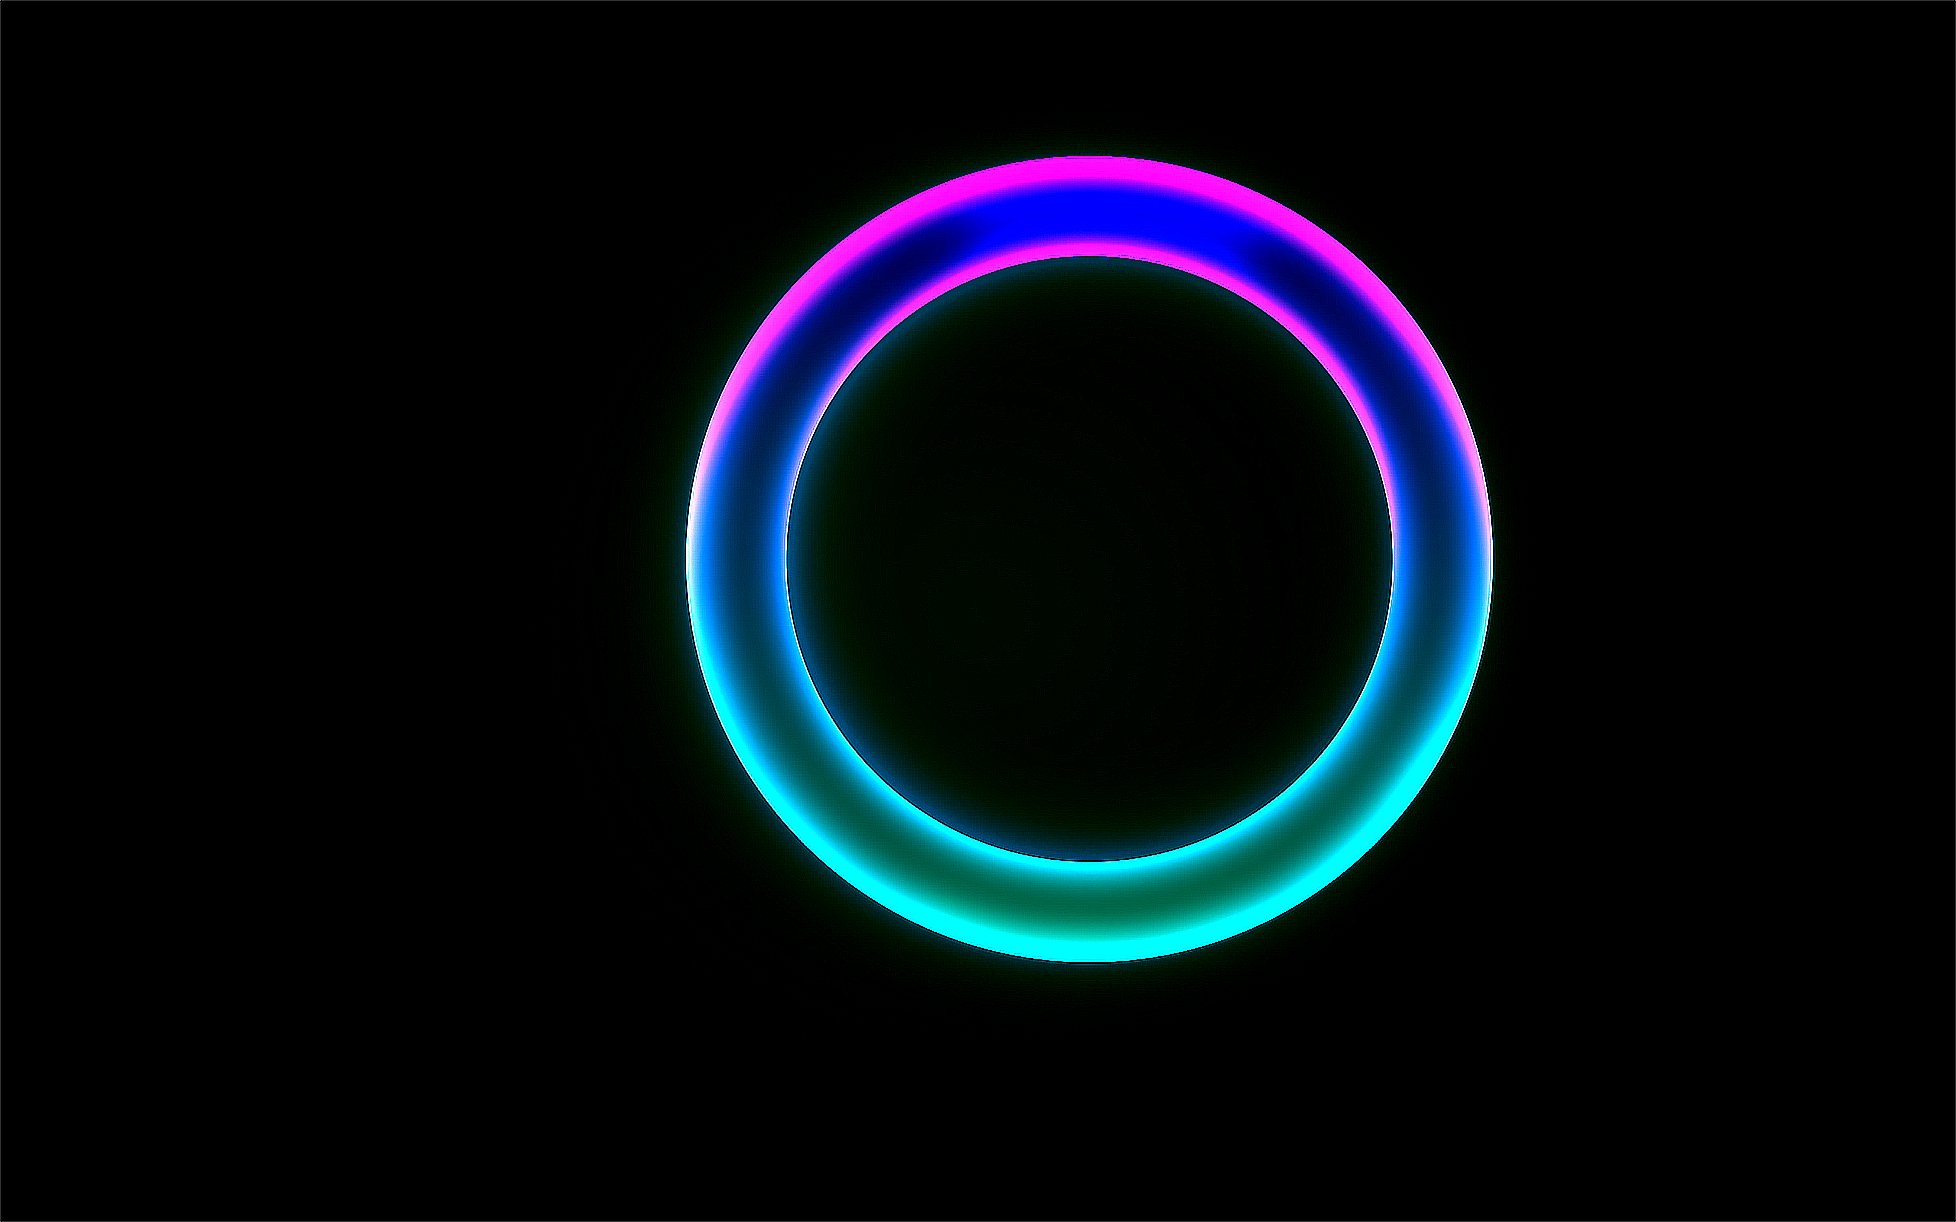 Abstract Ring HD Wallpaper | Background Image